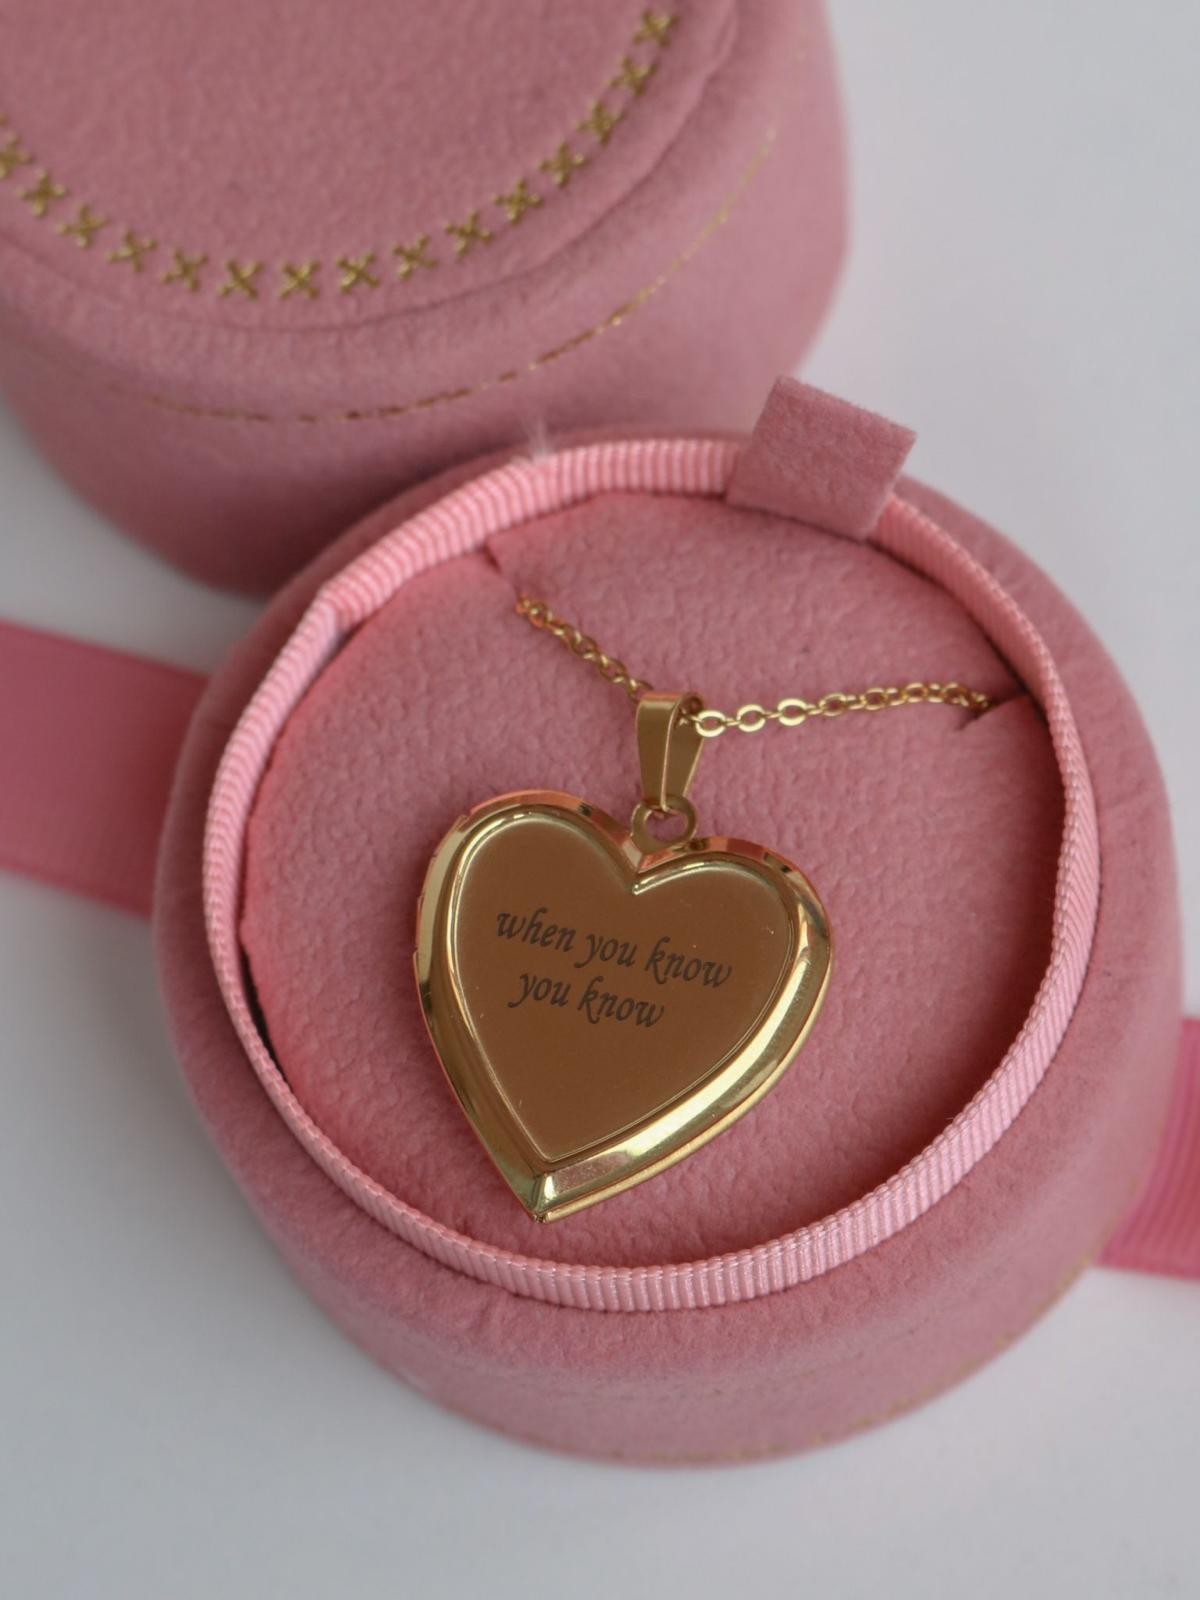 Steel Heart Locket Necklace with Personalized Written Photo